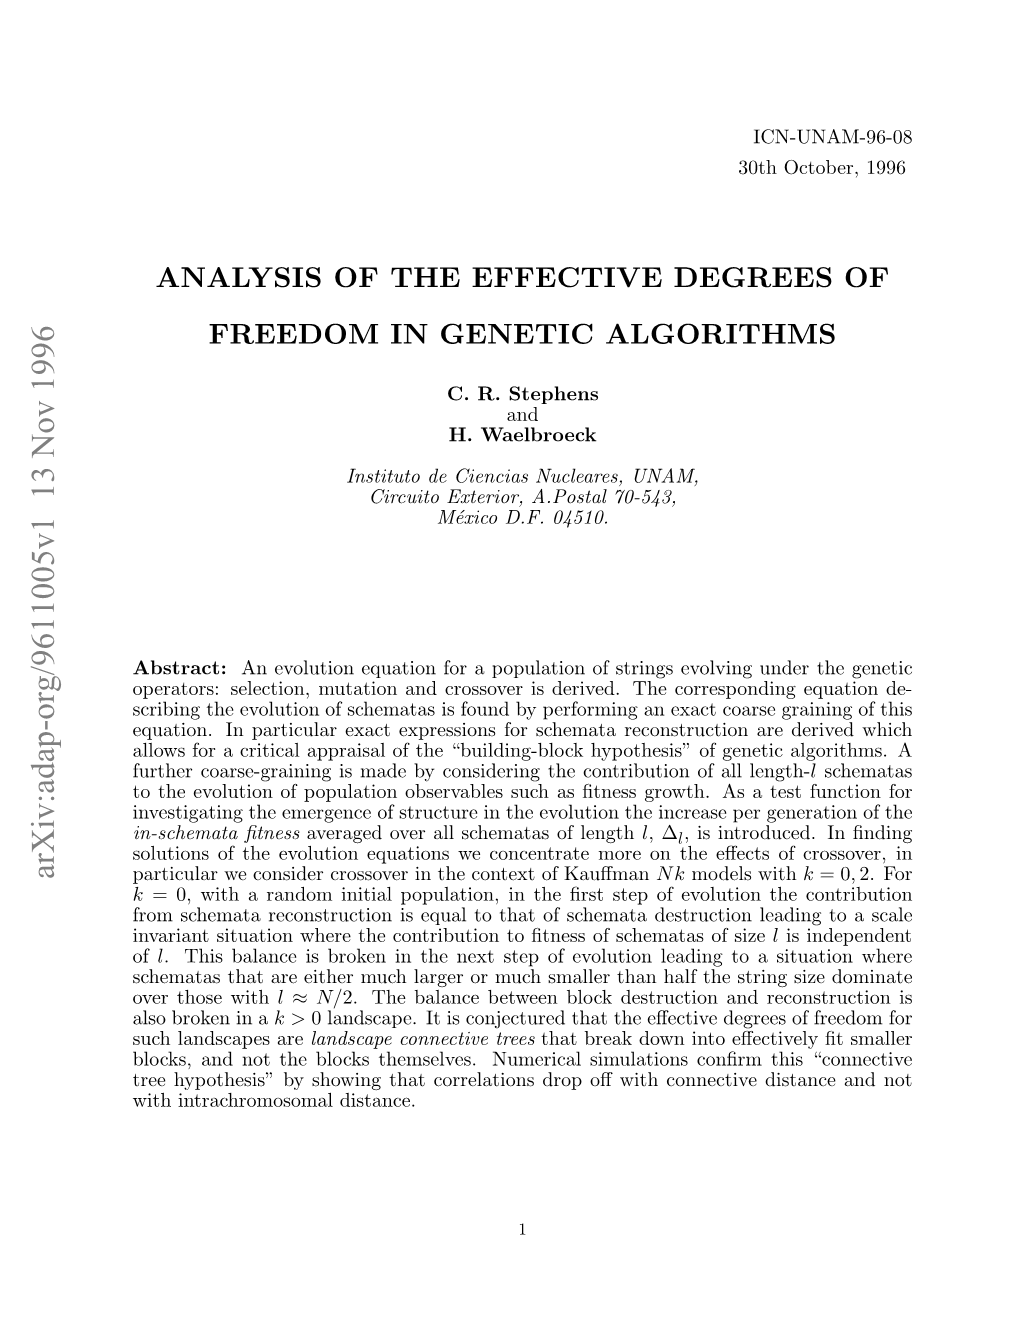 Analysis of the Effective Degrees of Freedom in Genetic Algorithms